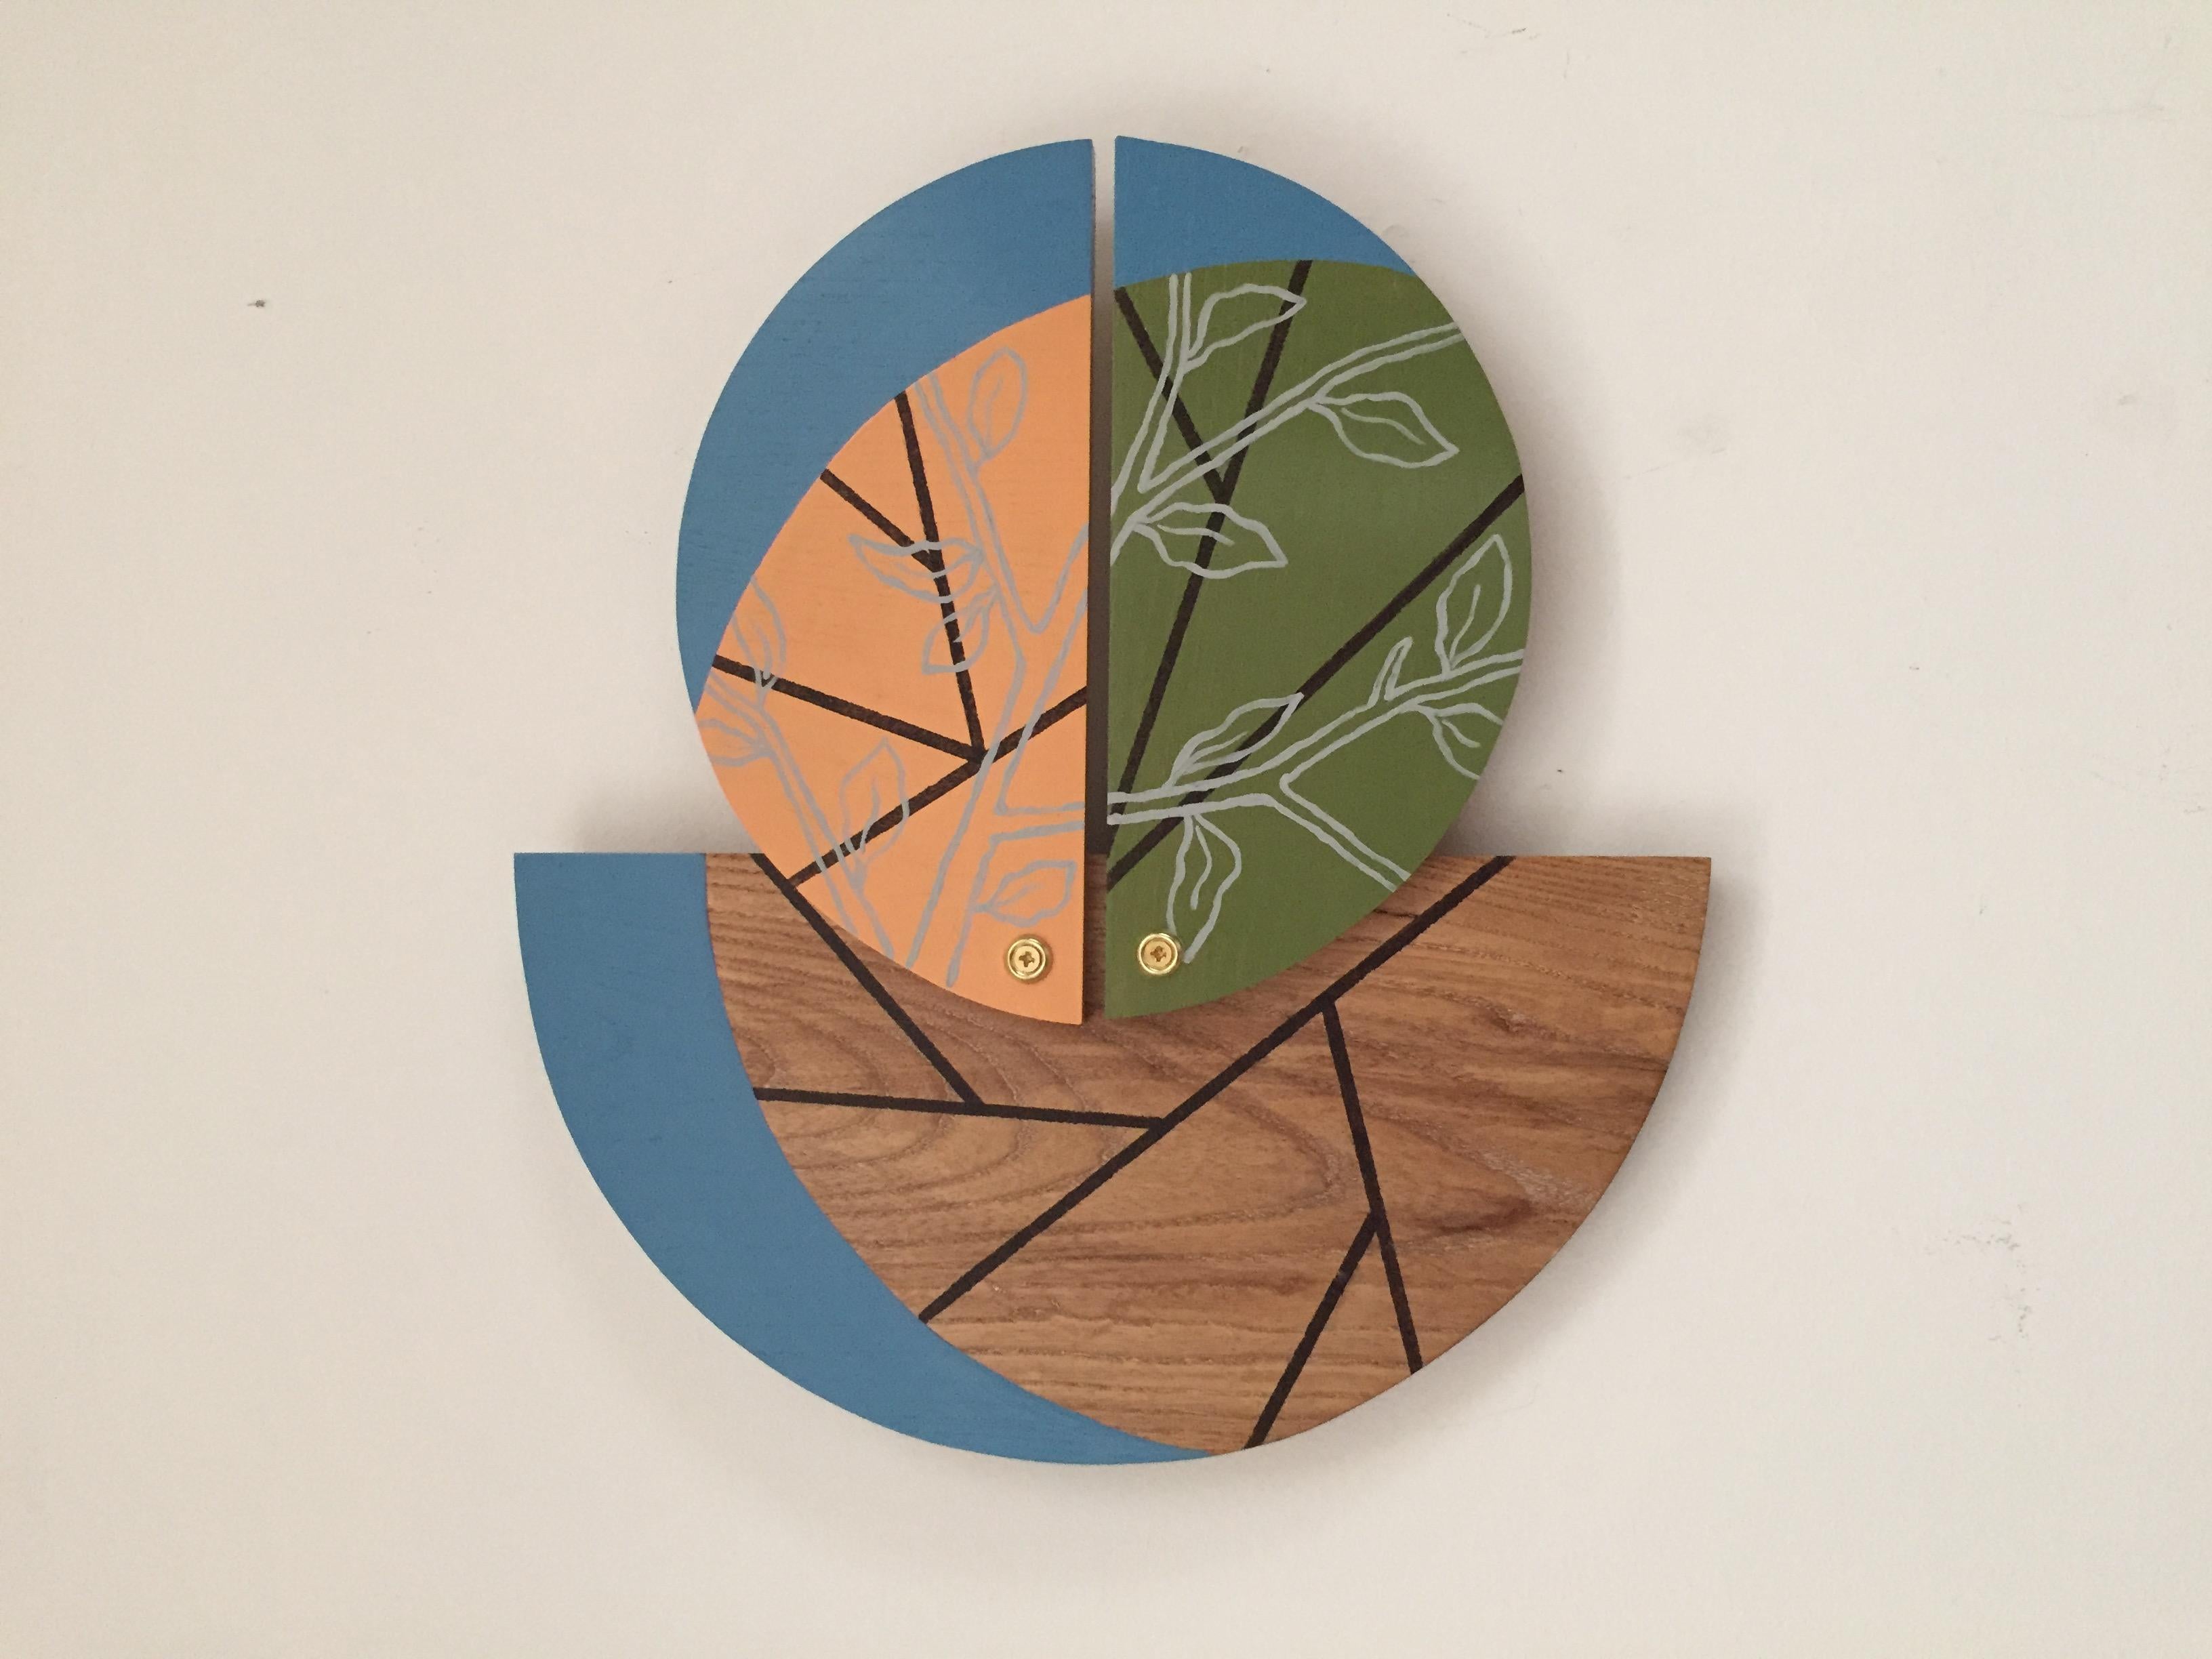 Charlotte Lees Still-Life Sculpture - "Earth Series,  Wall sculpture, hand painting and carving on wood 14" x 16" x 1"